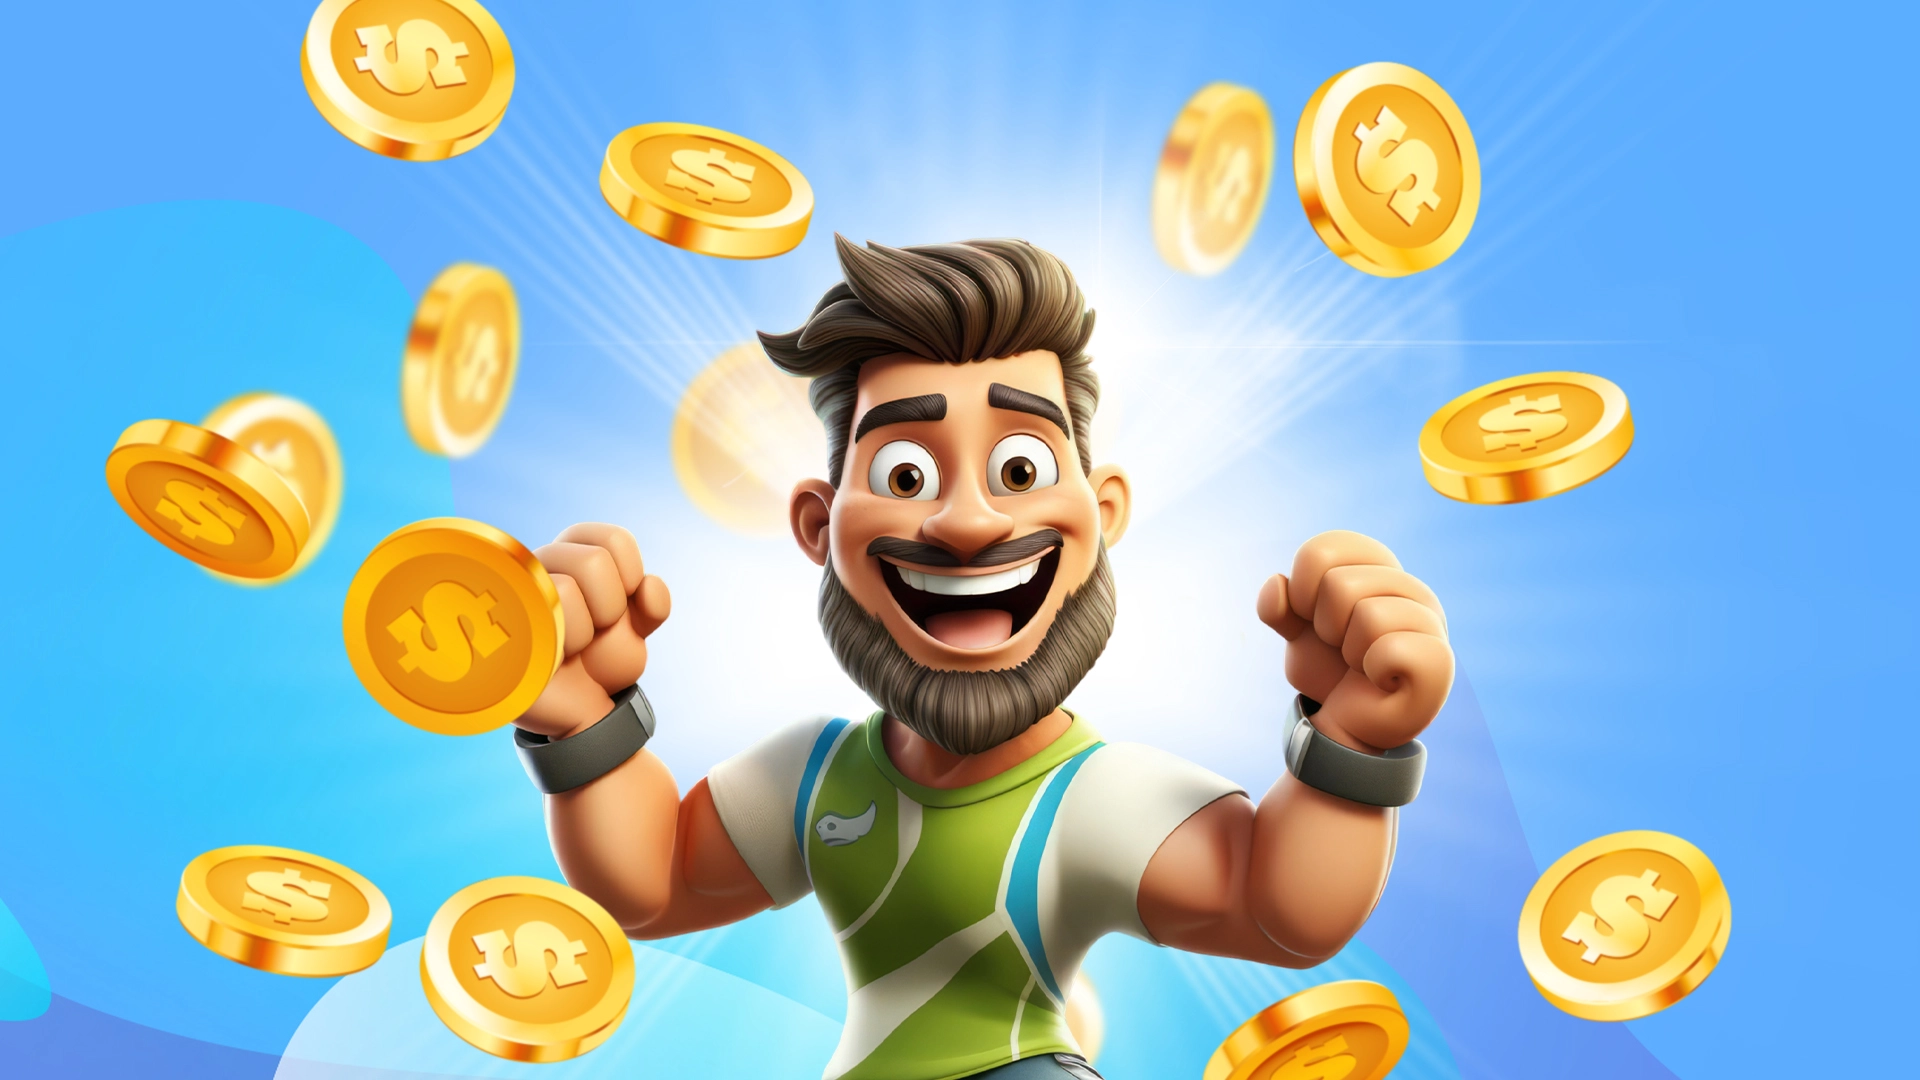 A man is super excited with gold coins floating around him and it’s all on a light blue background.